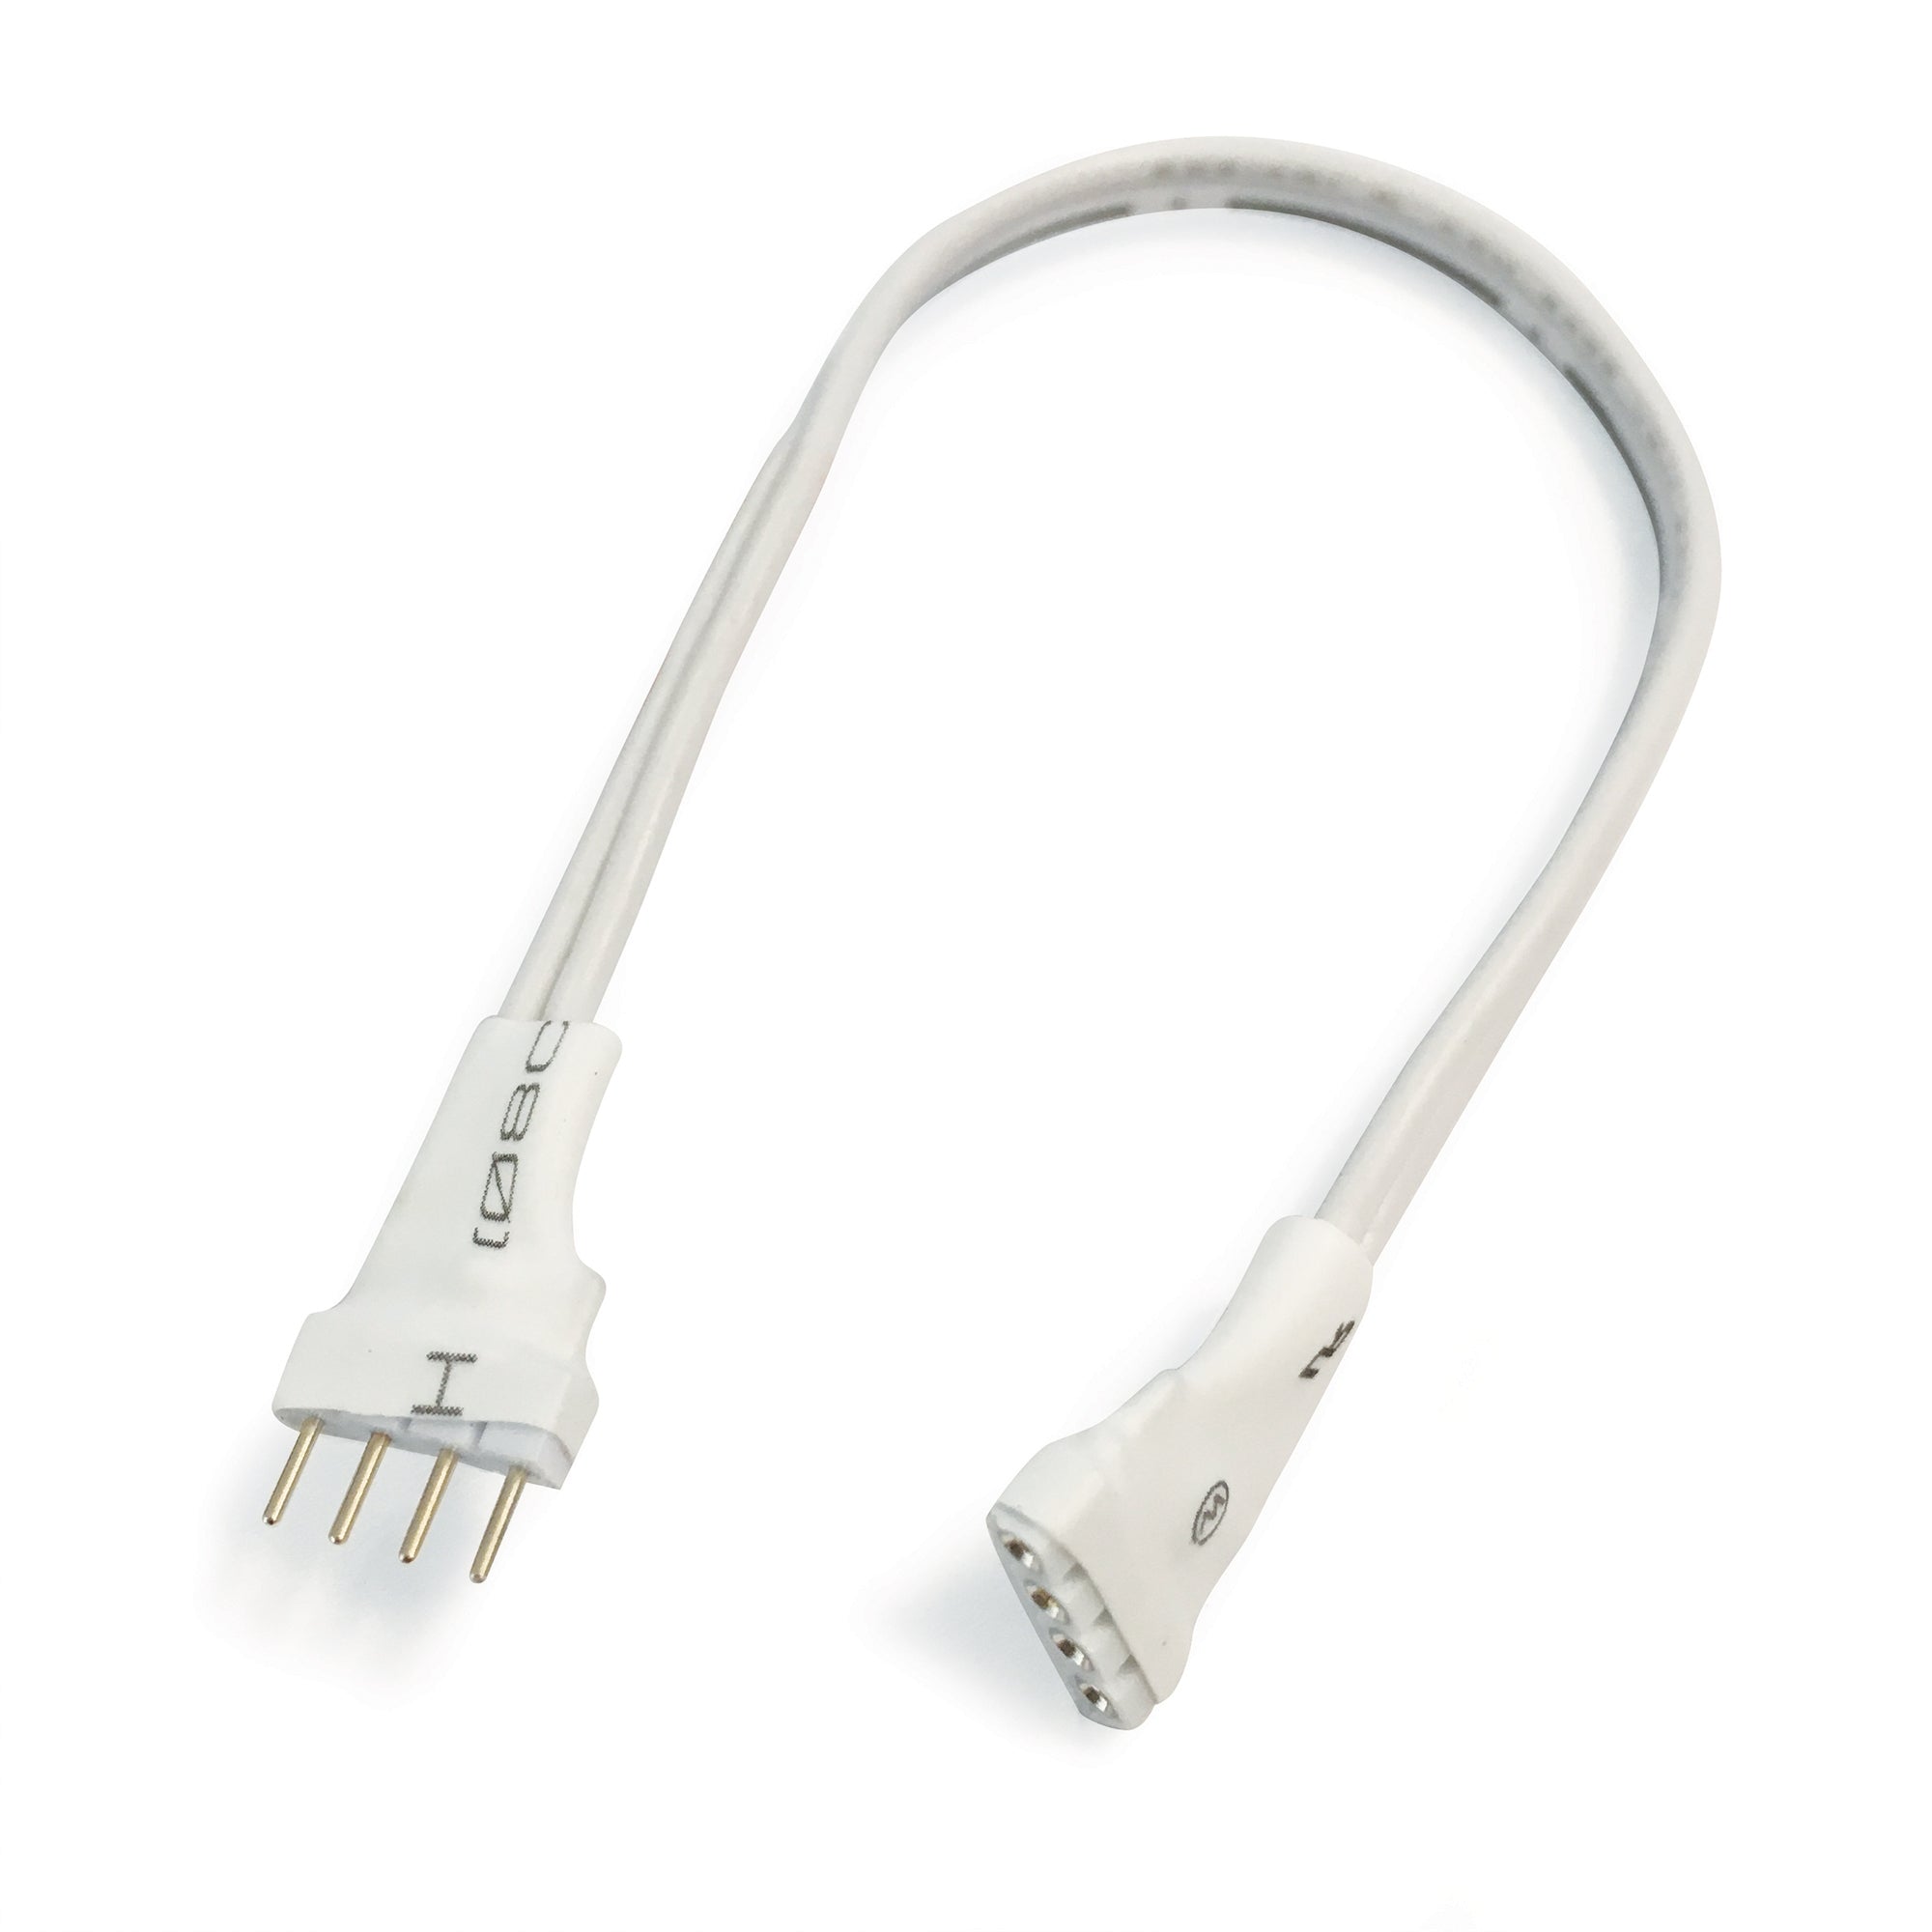 Nora Lighting NARGB-706W - Accent / Undercabinet - 6 Inch Interconnection Cable for 12V or 24V RGB & CCT Tape Light